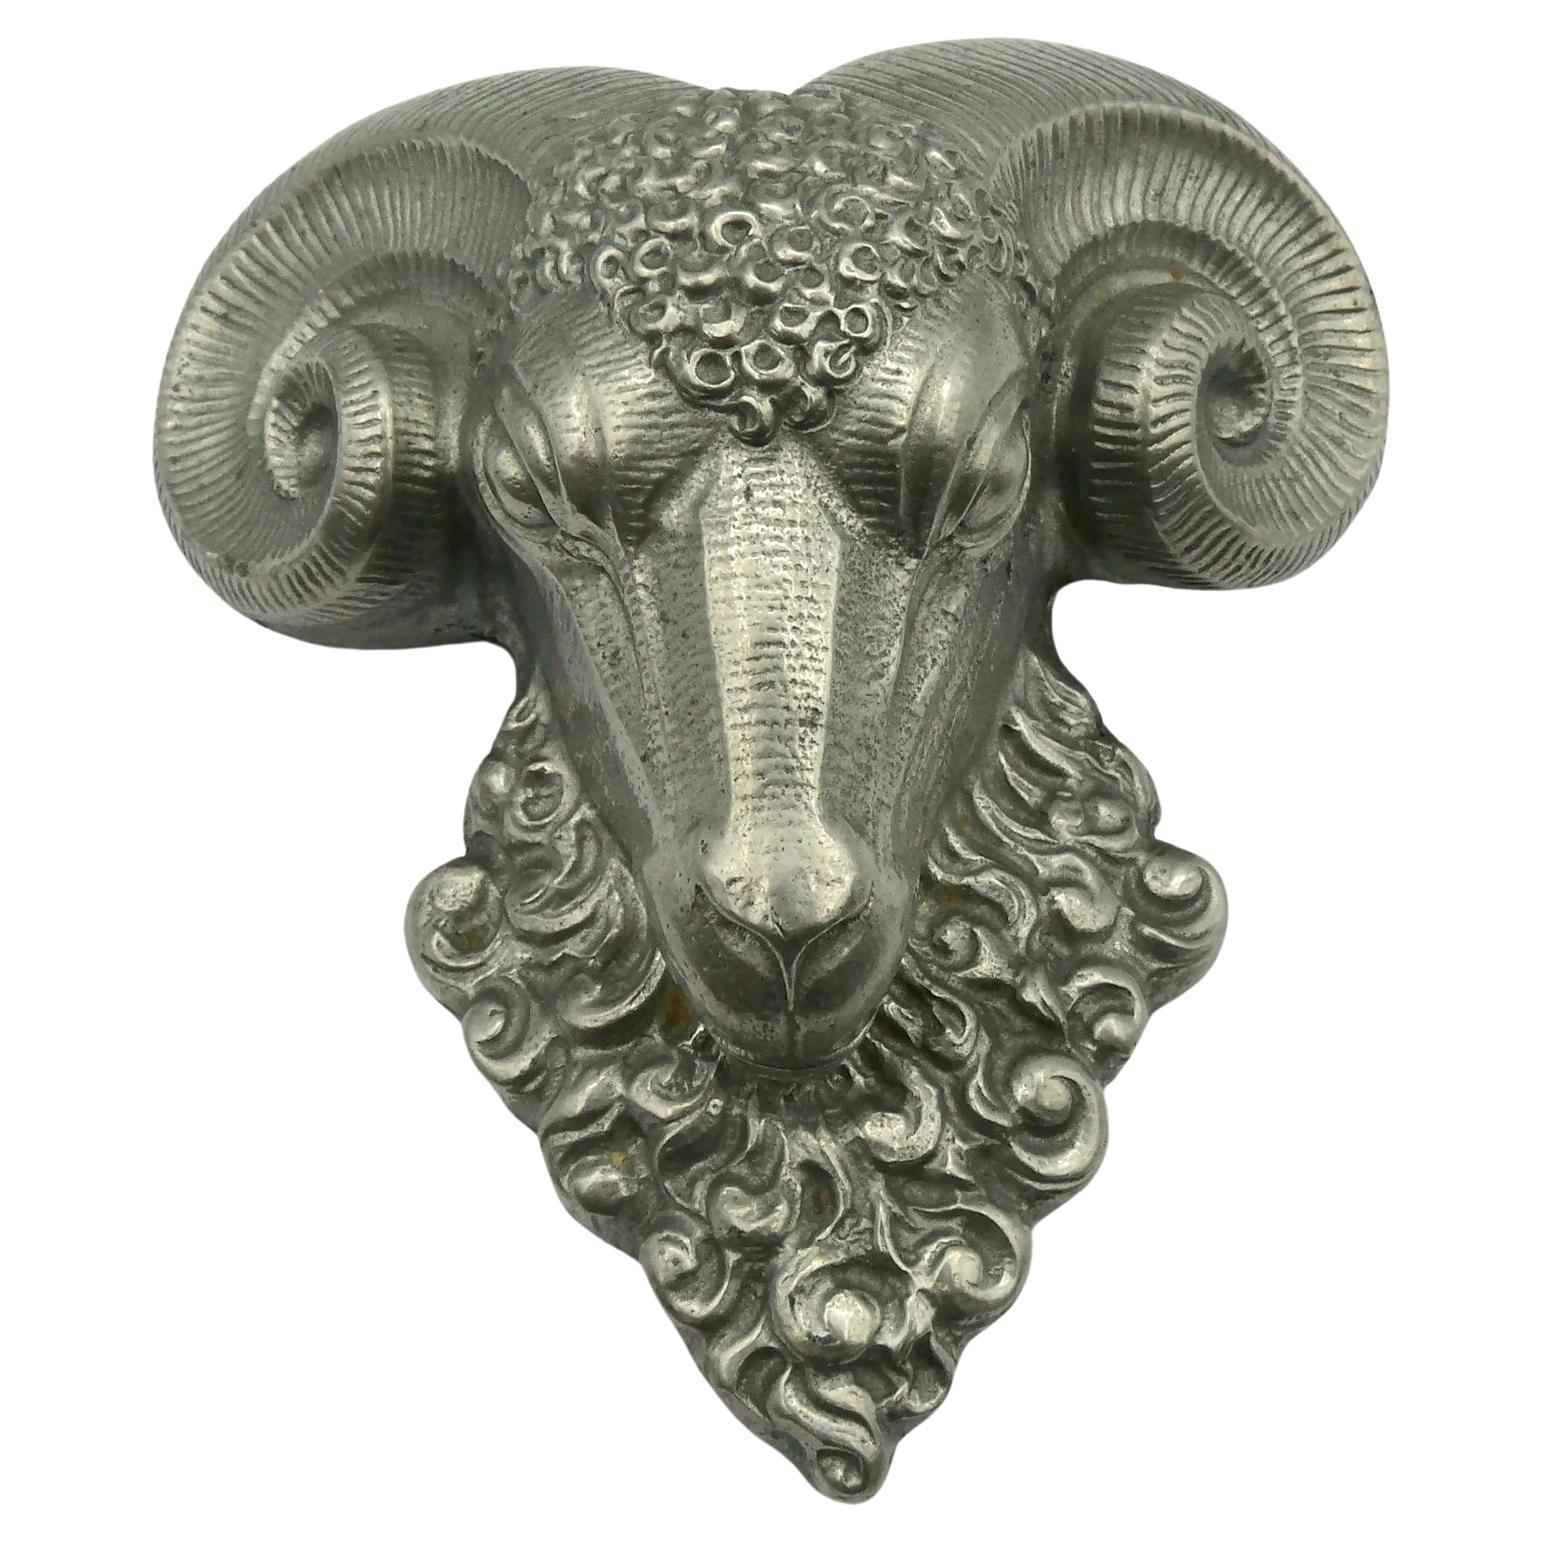 CHRISTIAN DIOR Vintage Silver Tone Ram's Head Paperweight For Sale